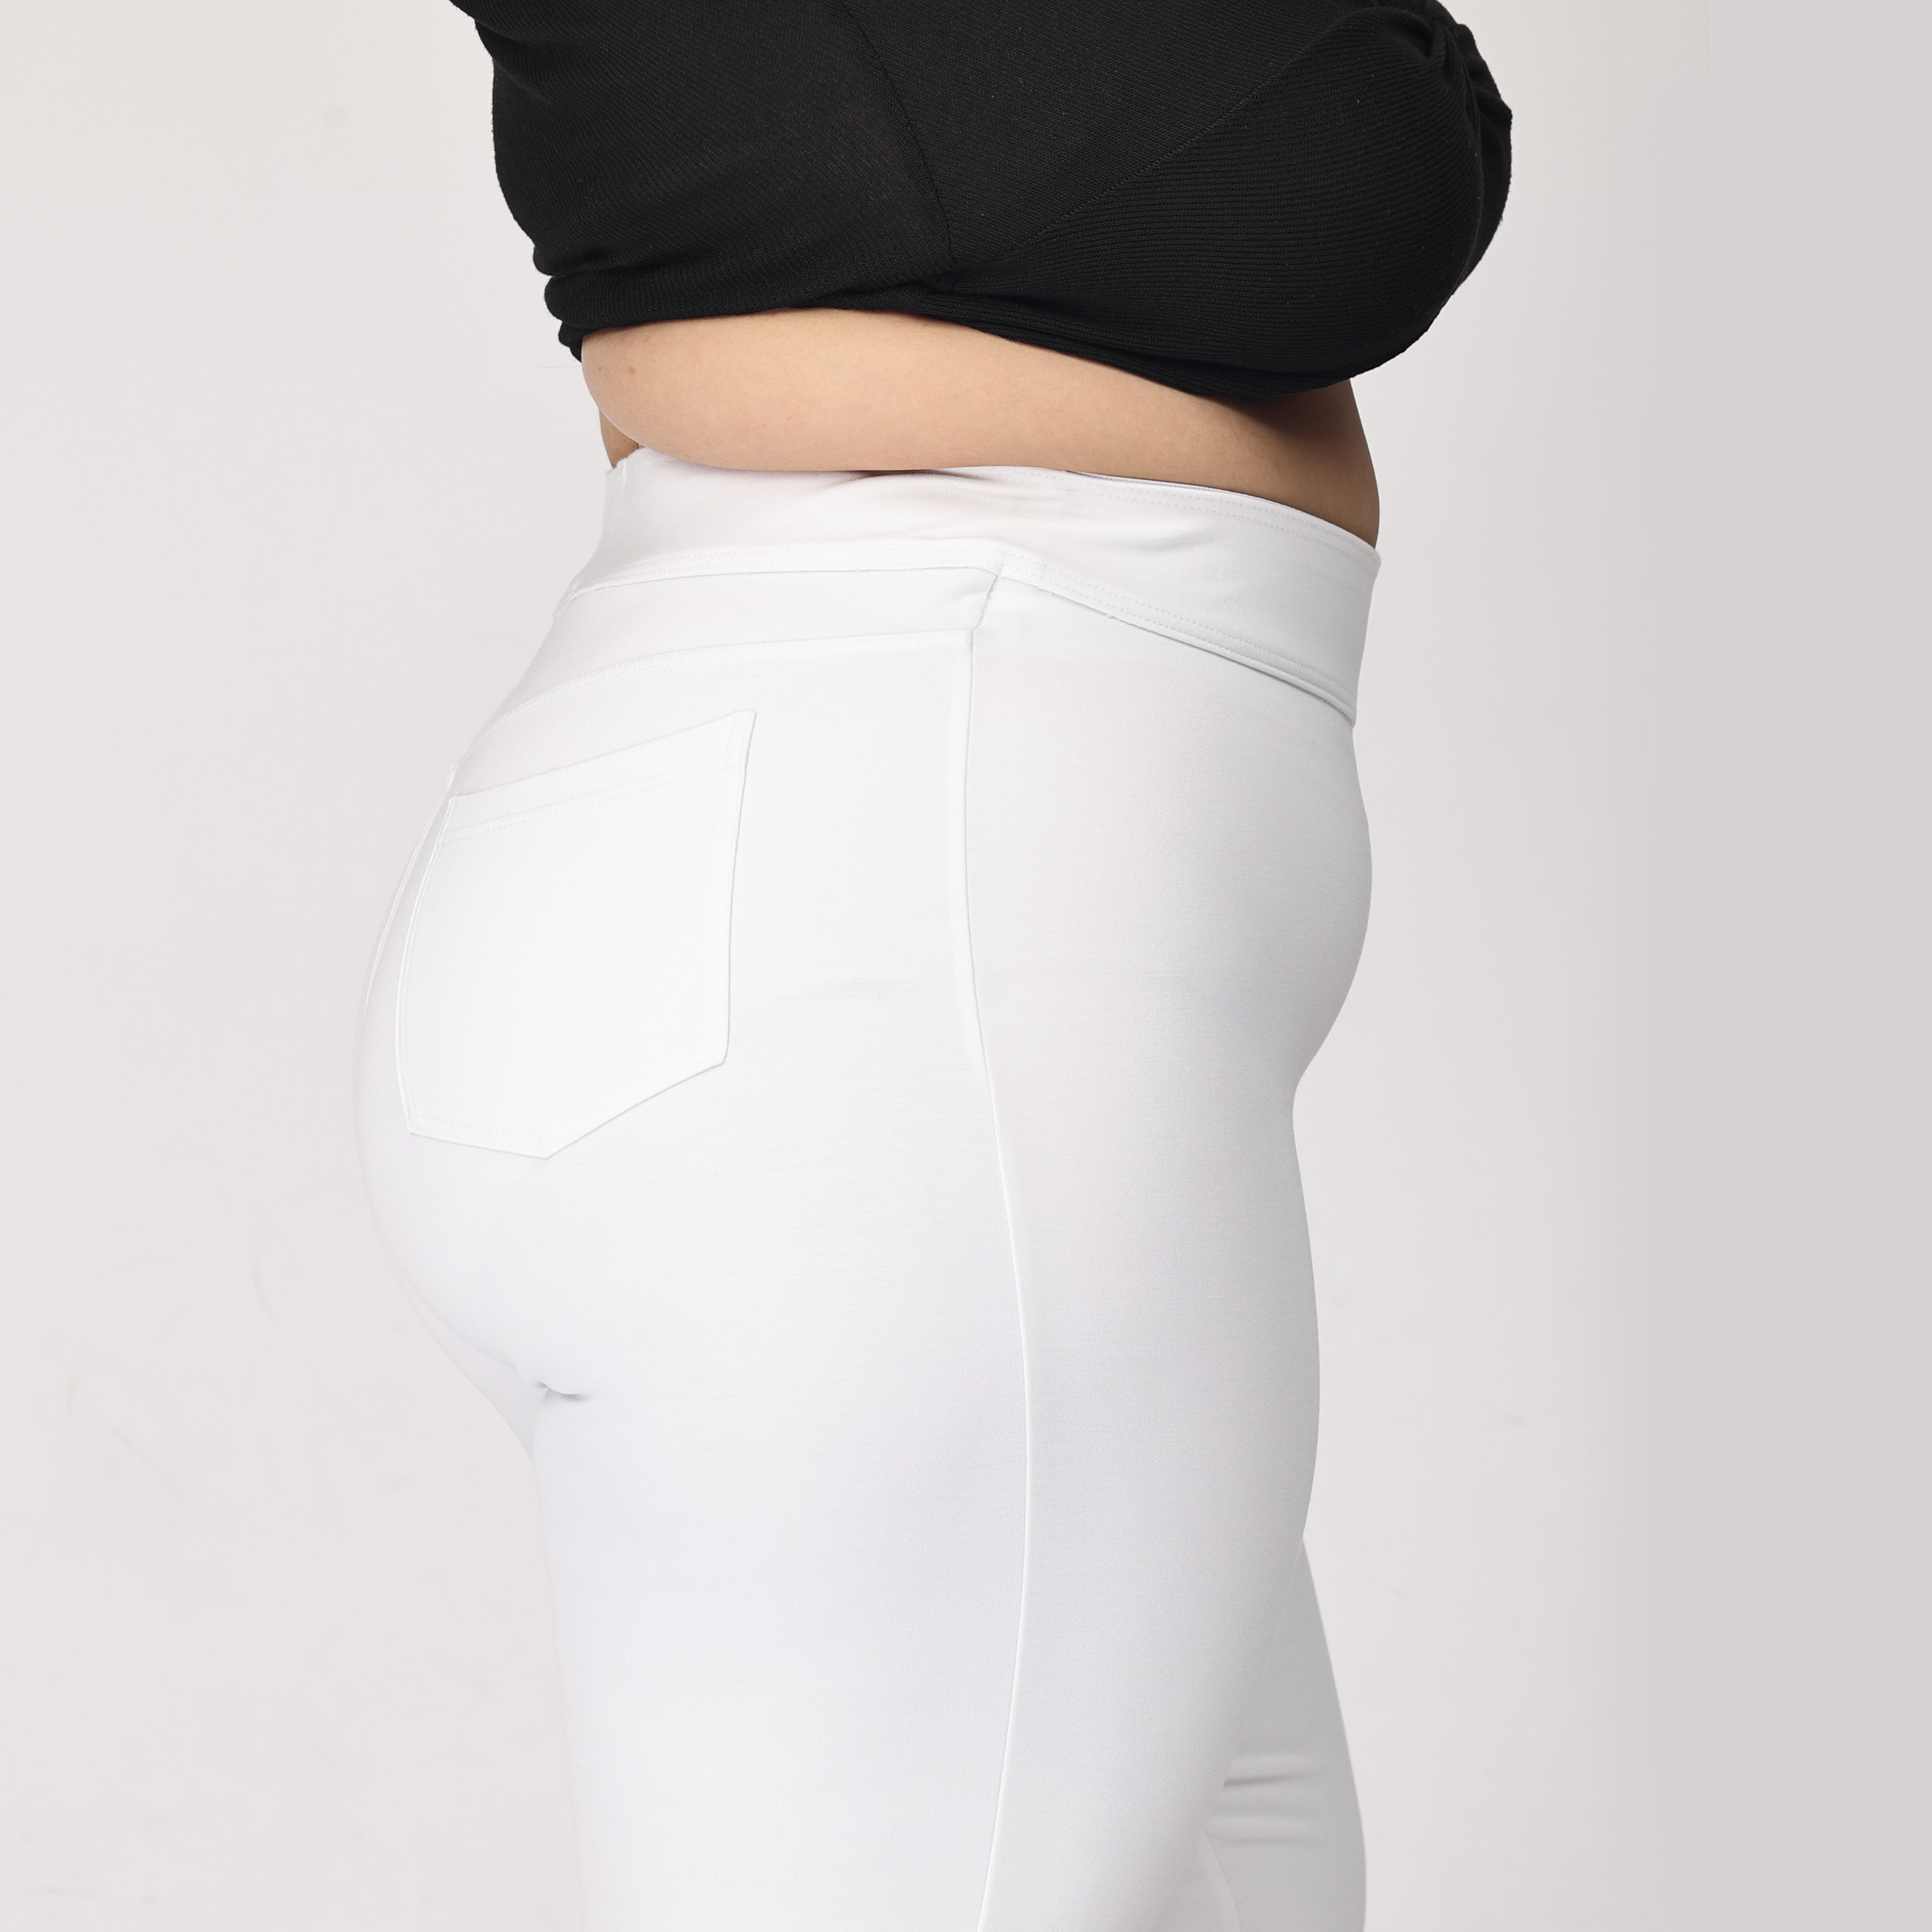 White Formal Crop Top & High Waist Pants | White tops outfit, Classy  outfits, White outfits for women